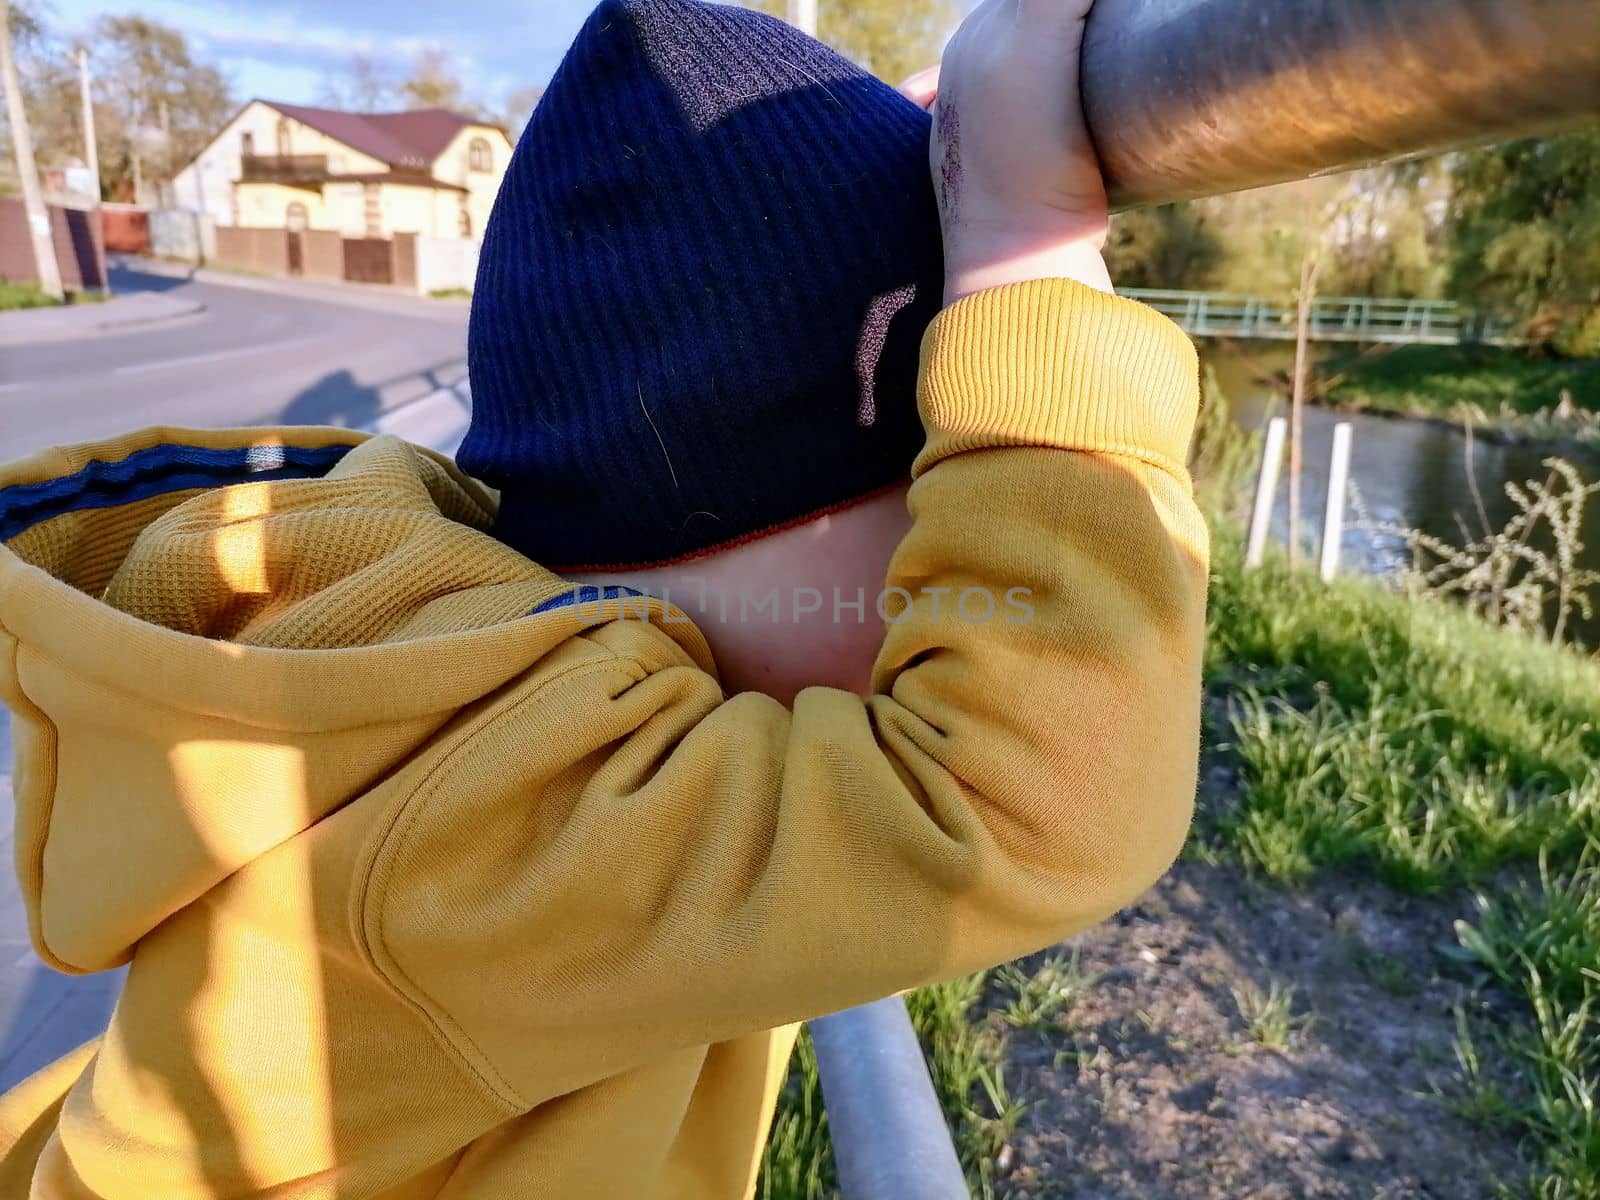 Adorable little toddler boy having fun on playground, child wearing yellow hoody jacket. High quality photo